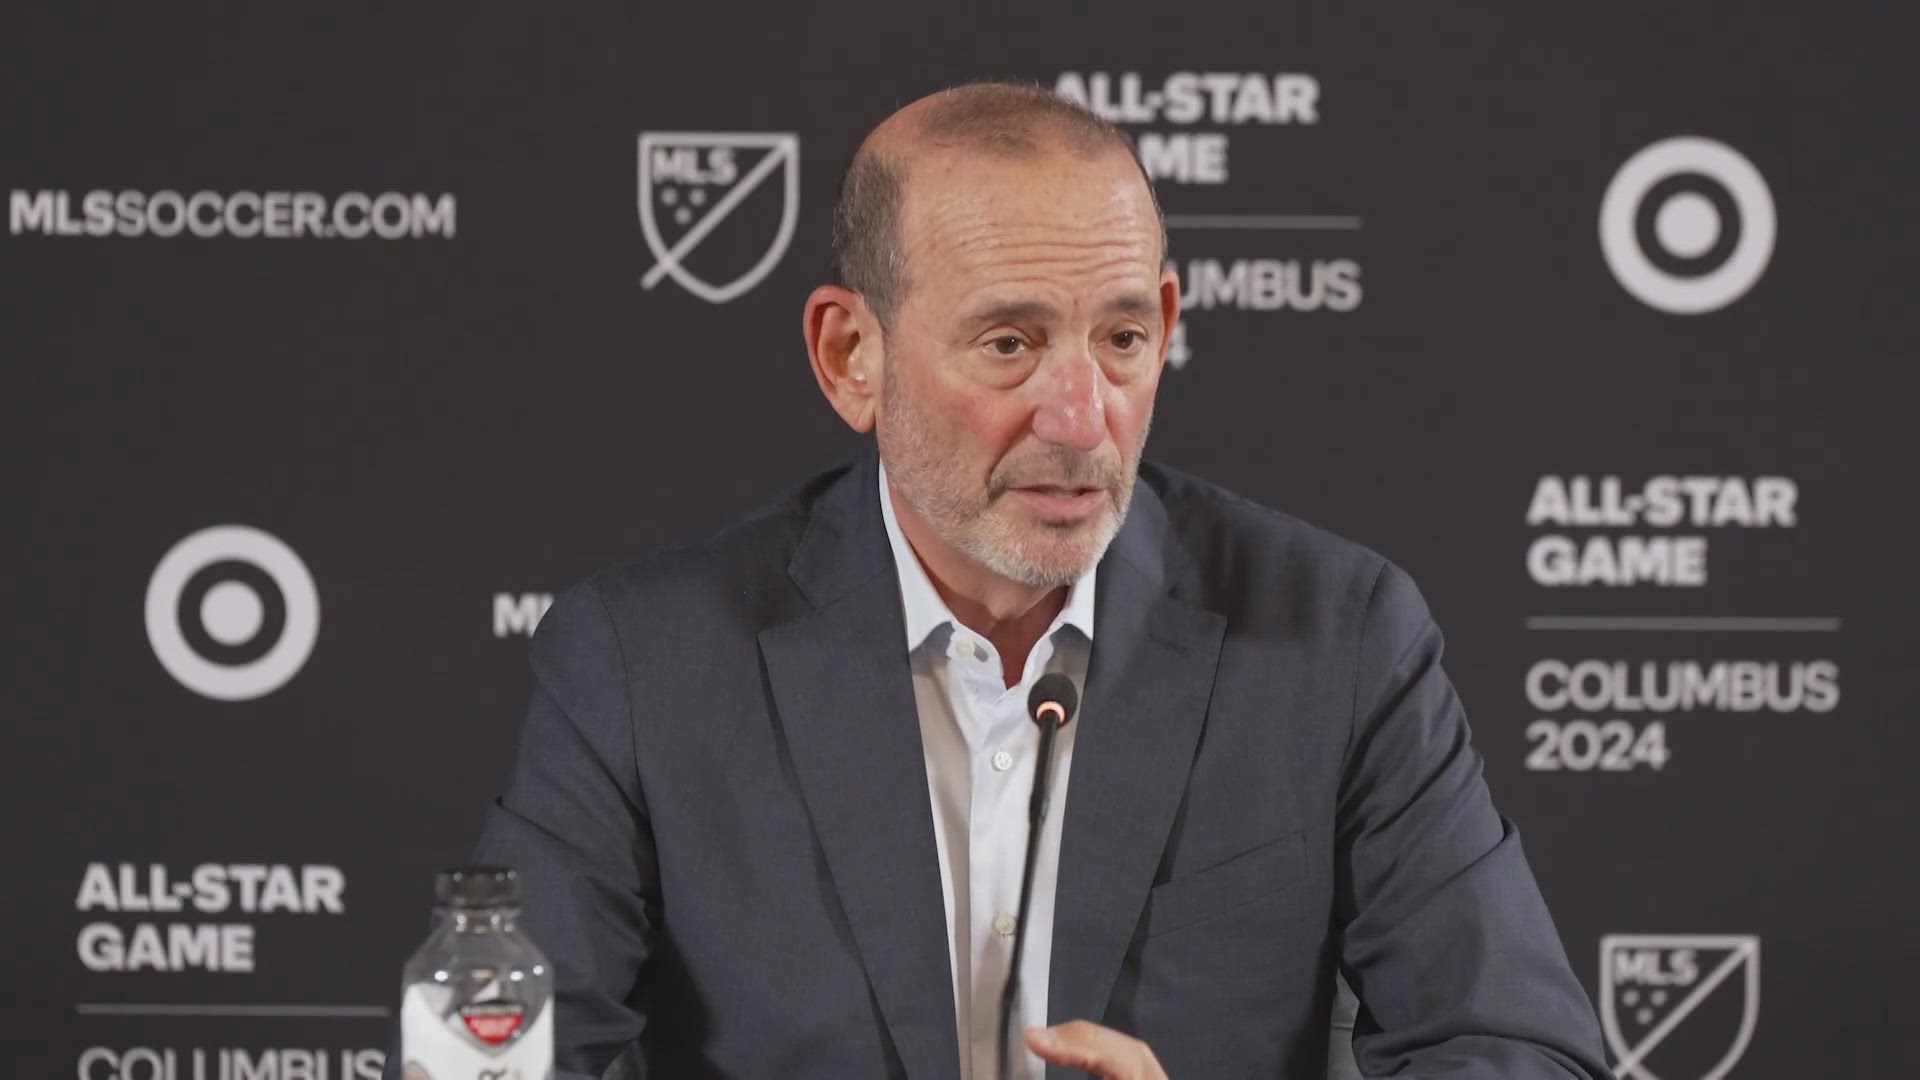 13News reporter Lauren Kostiuk reports that the MLS Commissioner appeared to downplay immediate plans for an Indianapolis expansion team.